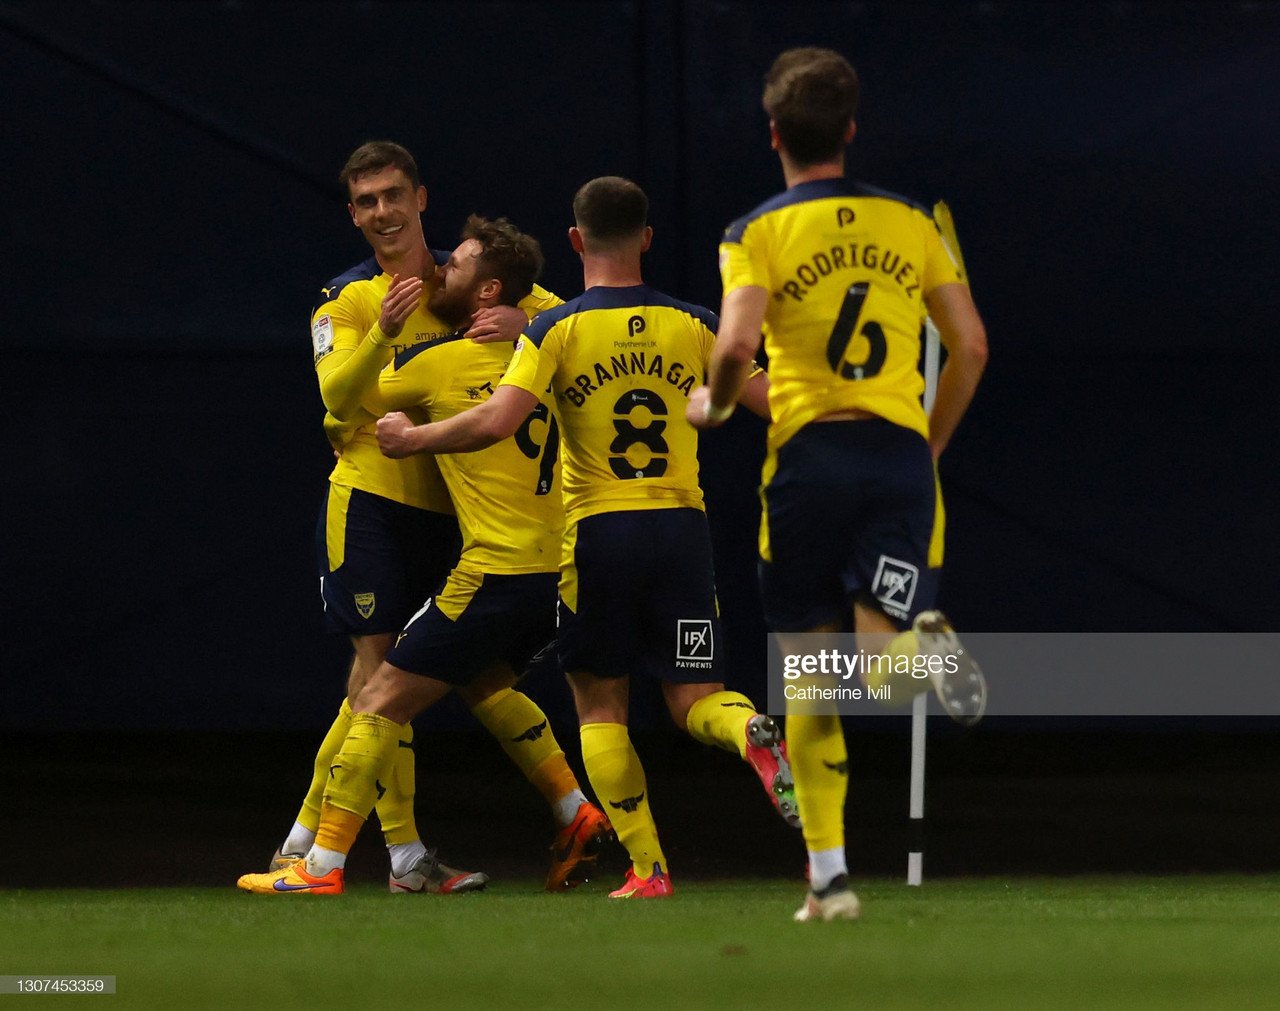 Oxford United must keep the foot on the gas in season-defining week for the U's